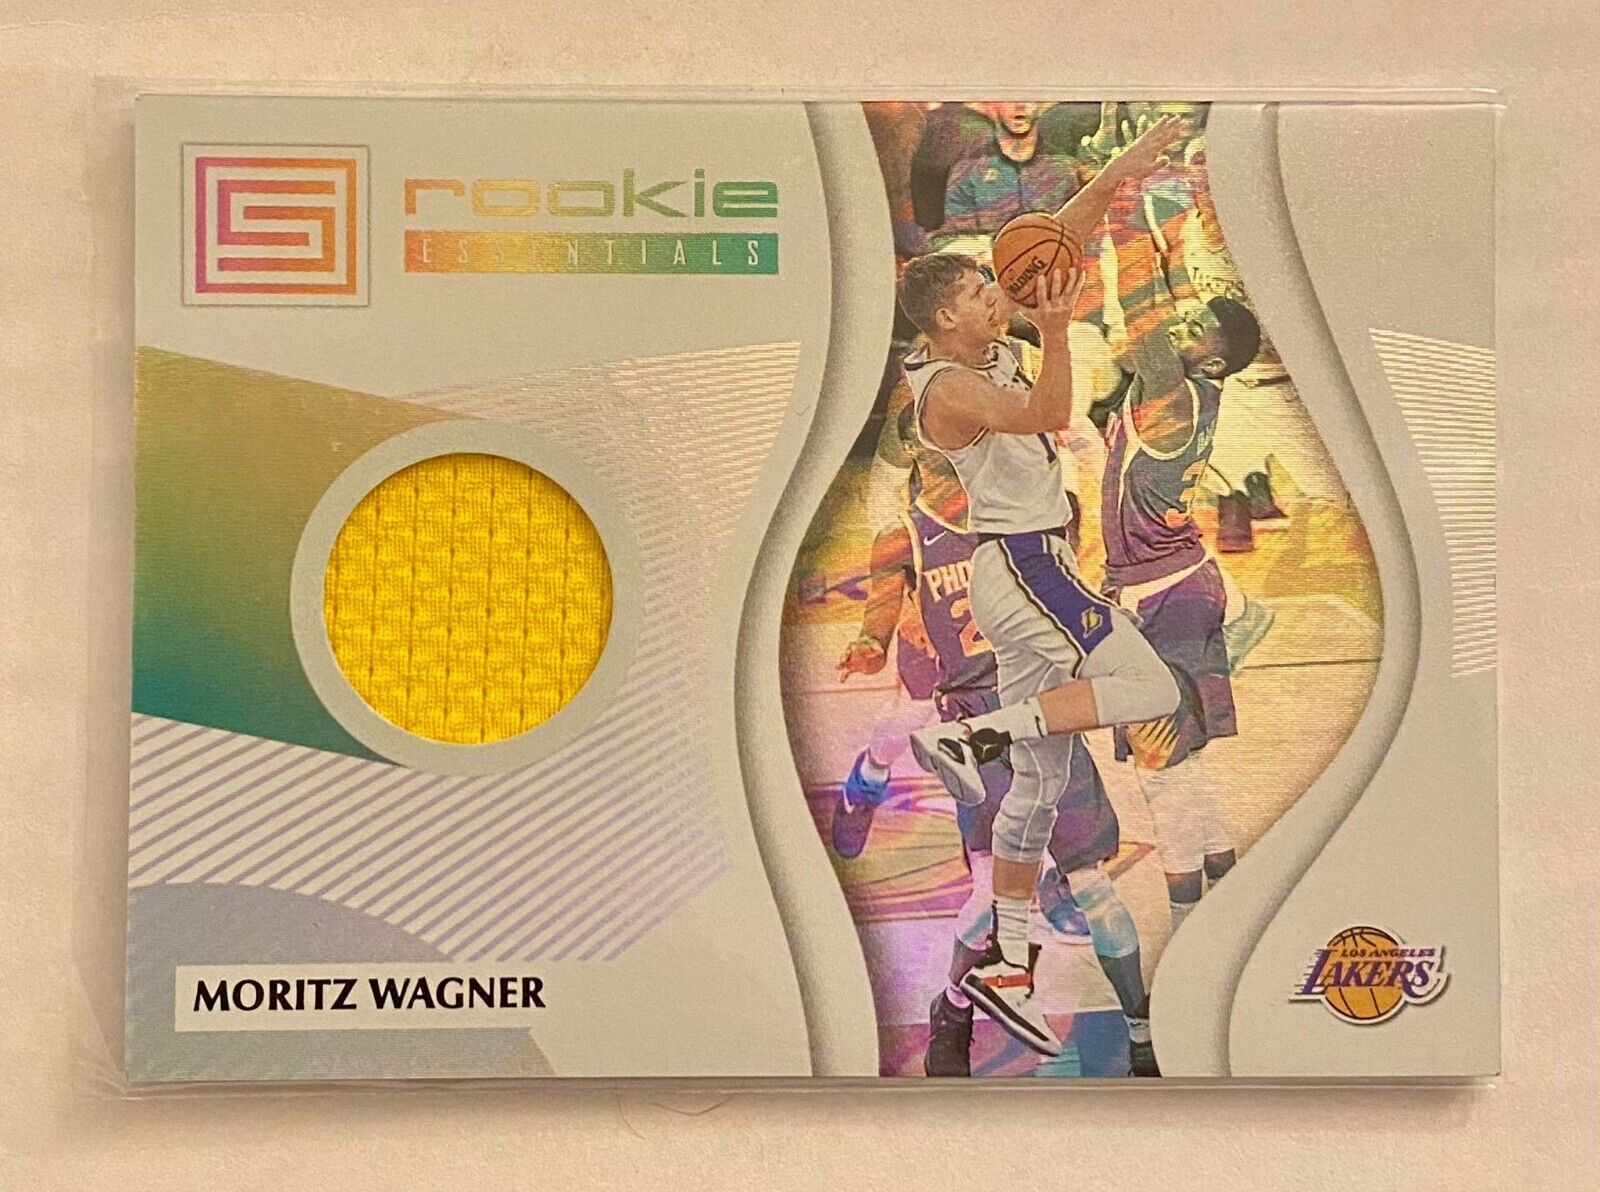 Moritz WAGNER 2018-19 Panini ELITE Basketball ESSENTIALS ROOKIE RC Lakers JERSEY